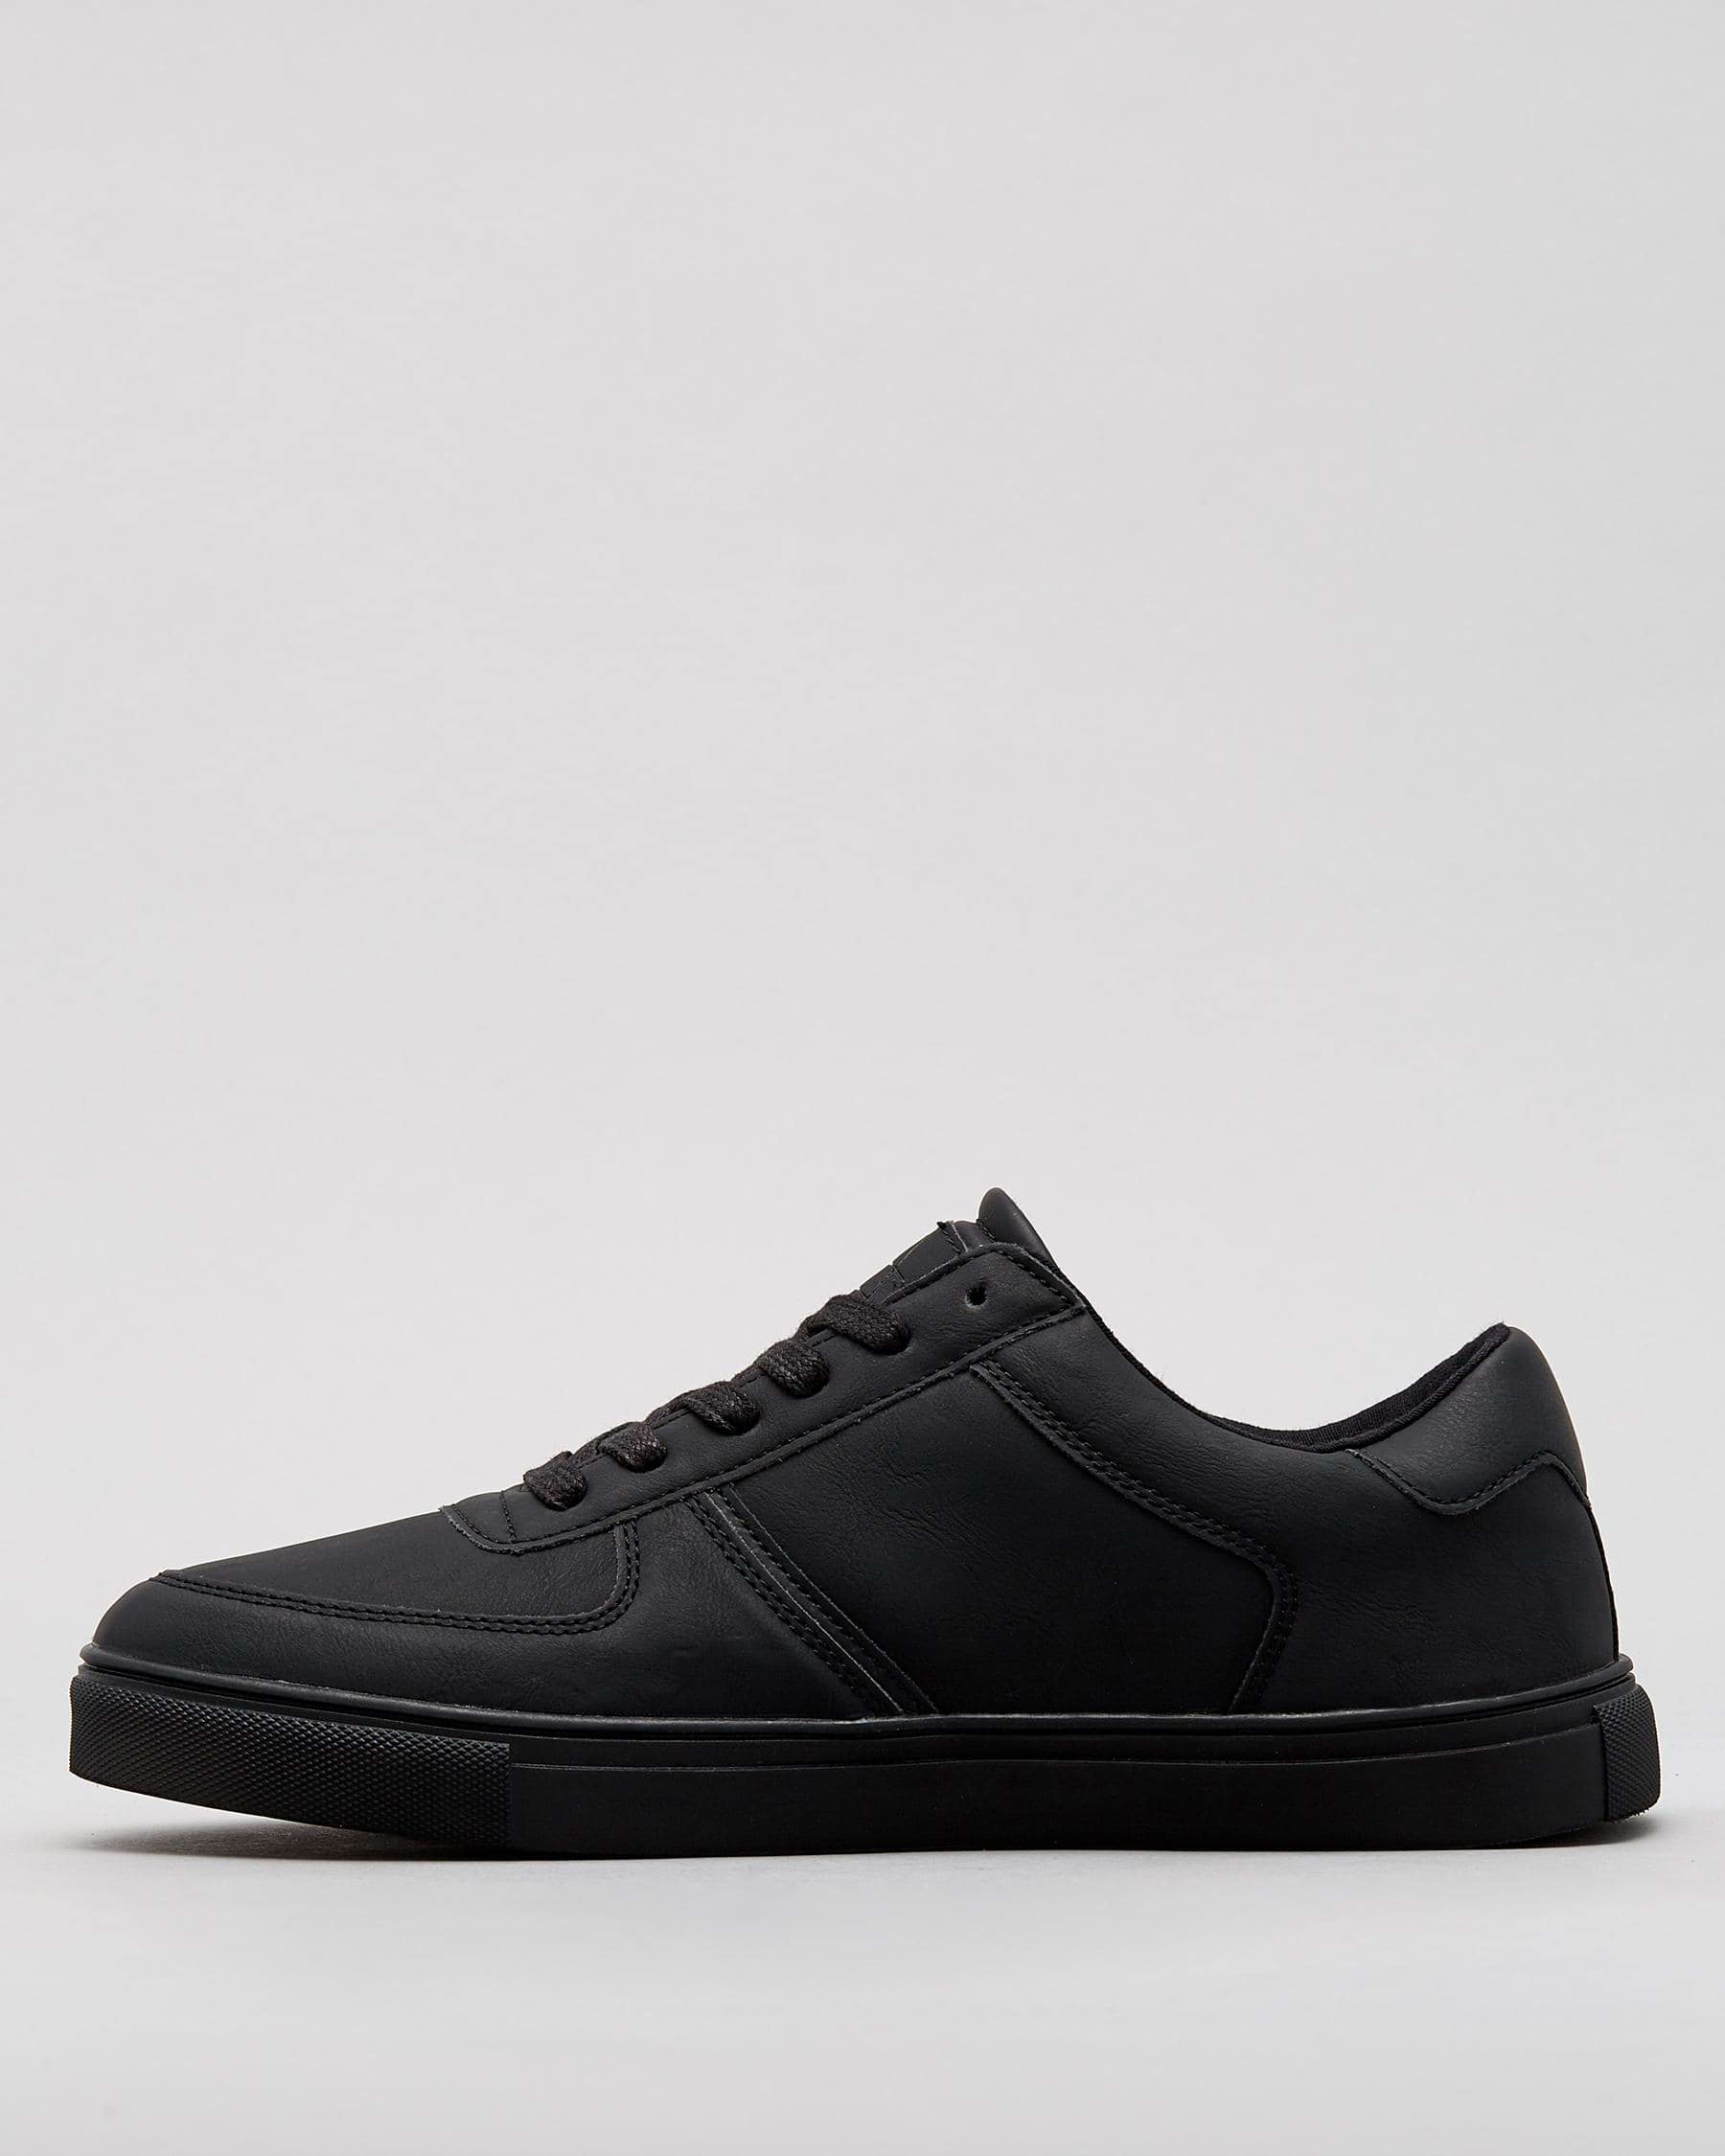 Shop Lucid Chester Shoes In Black/black/black - Fast Shipping & Easy ...